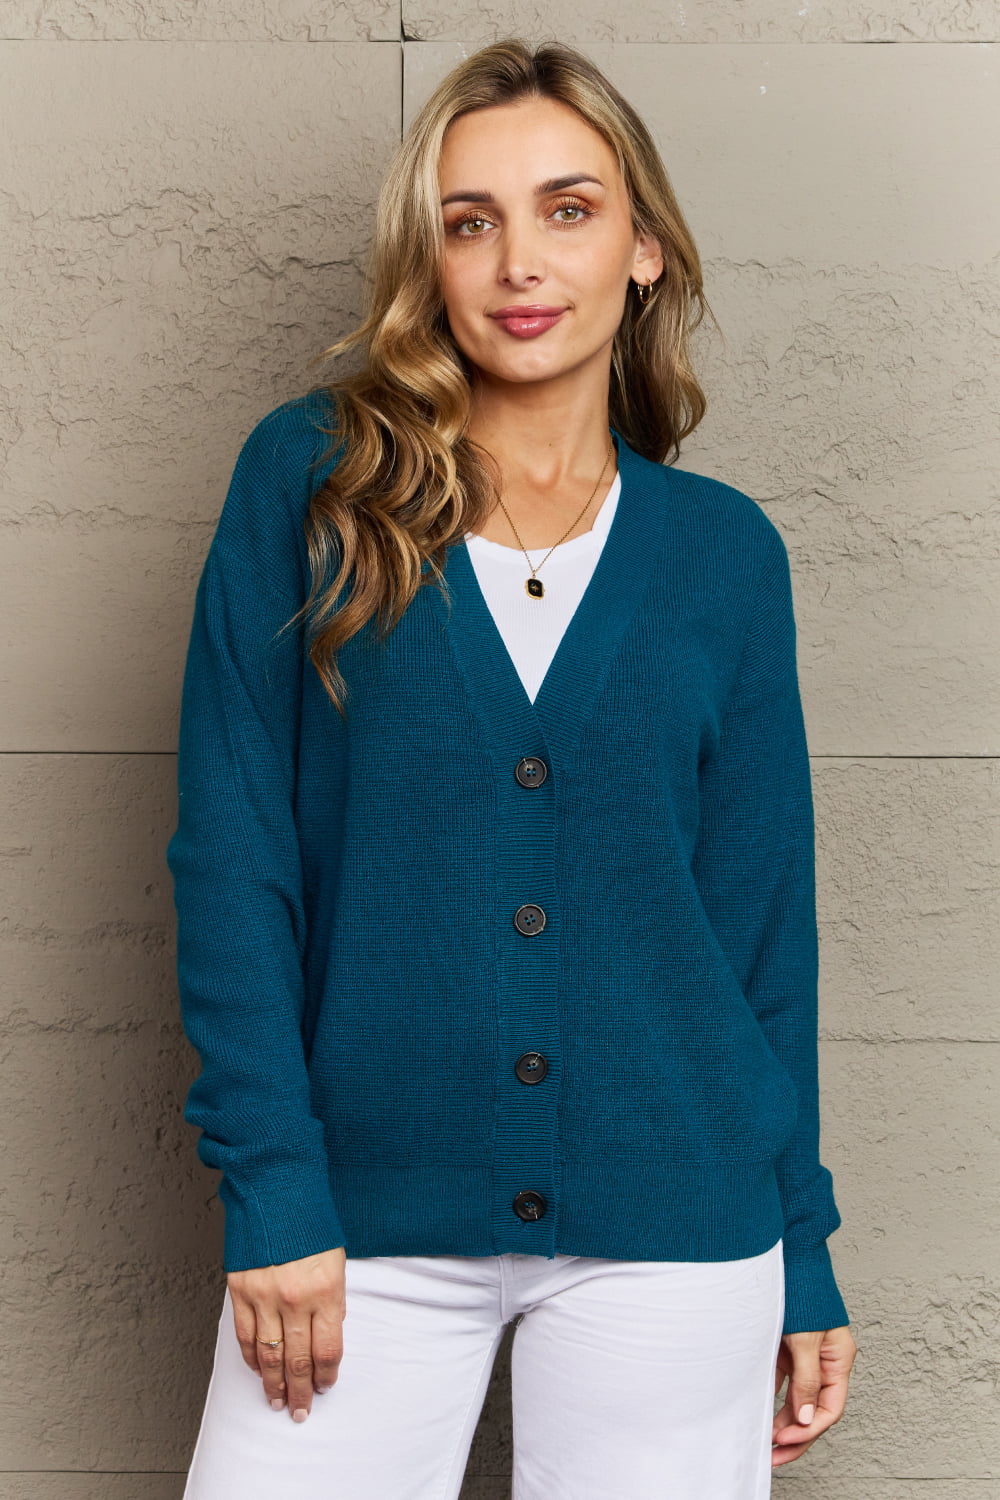 Zenana Kiss Me Tonight Full Size Button Down Cardigan in Teal-Cardigans + Kimonos-Inspired by Justeen-Women's Clothing Boutique in Chicago, Illinois